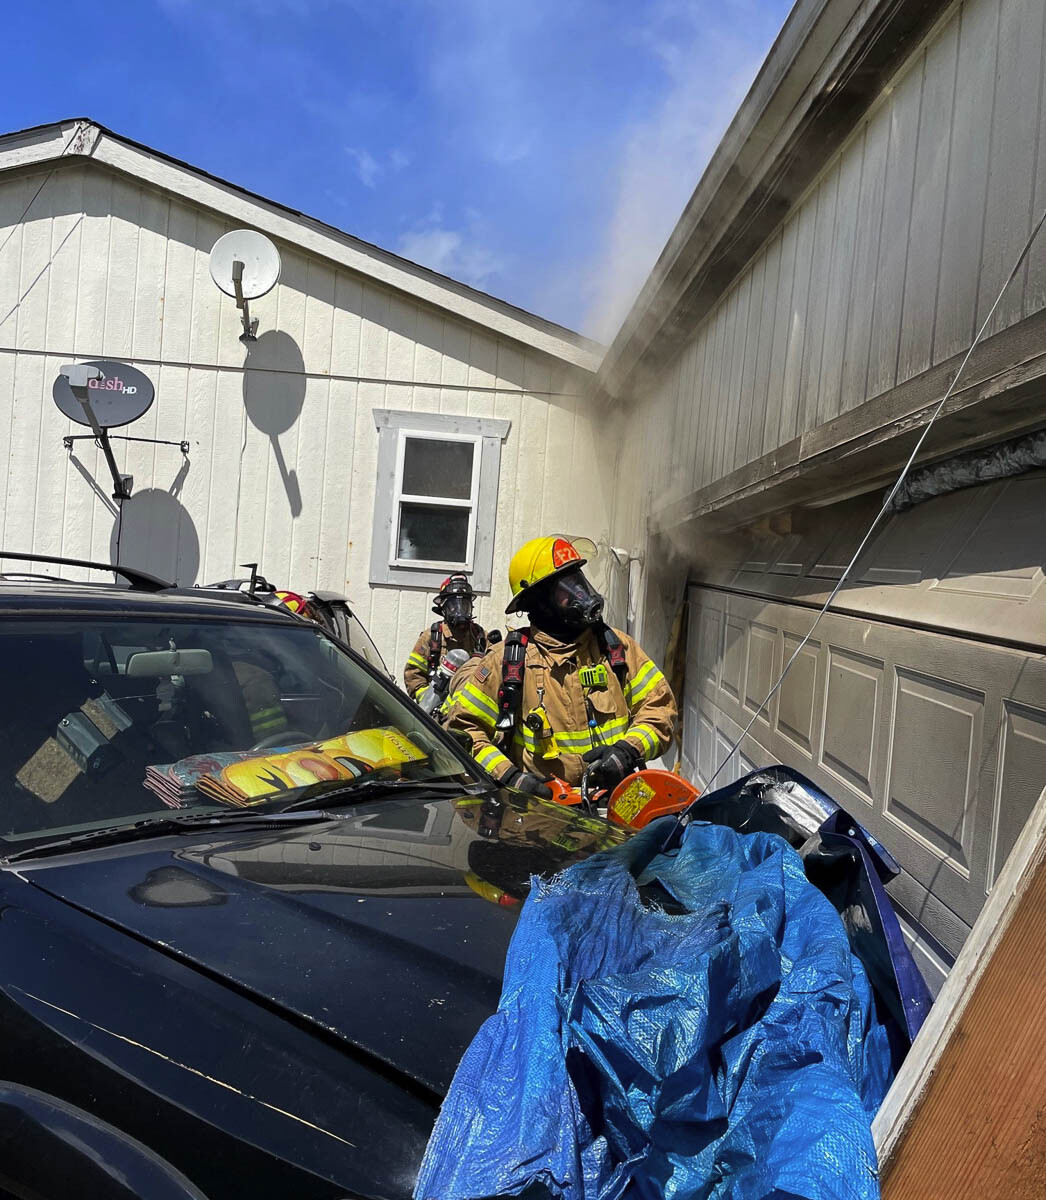 A garage fire in Woodland Tuesday afternoon led to the death of a pet and severe damage to a garage. Photo courtesy of Clark-Cowlitz Fire Rescue